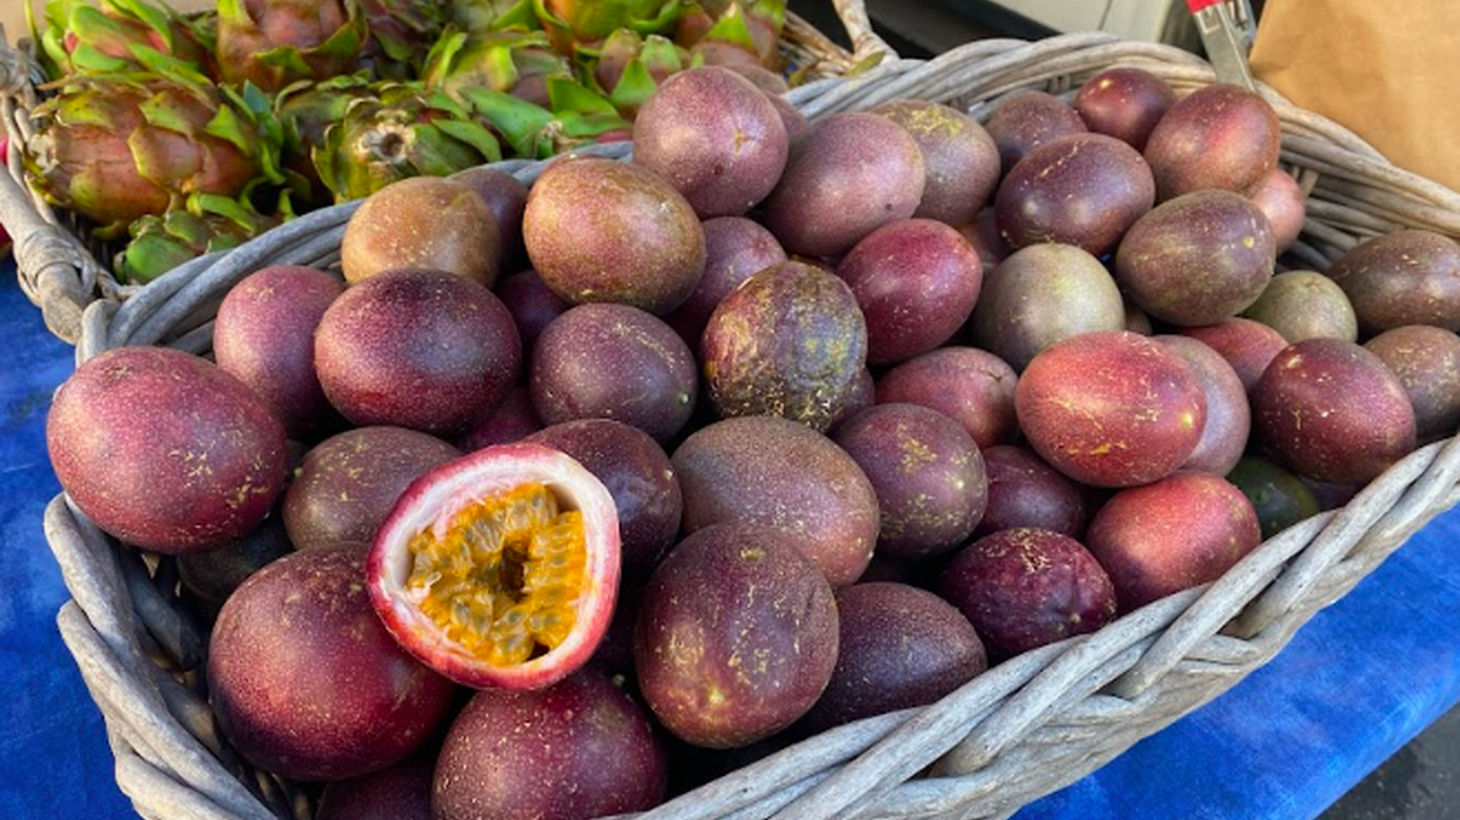 Nick Brown says the secret to growing plump passion fruit is pollination.